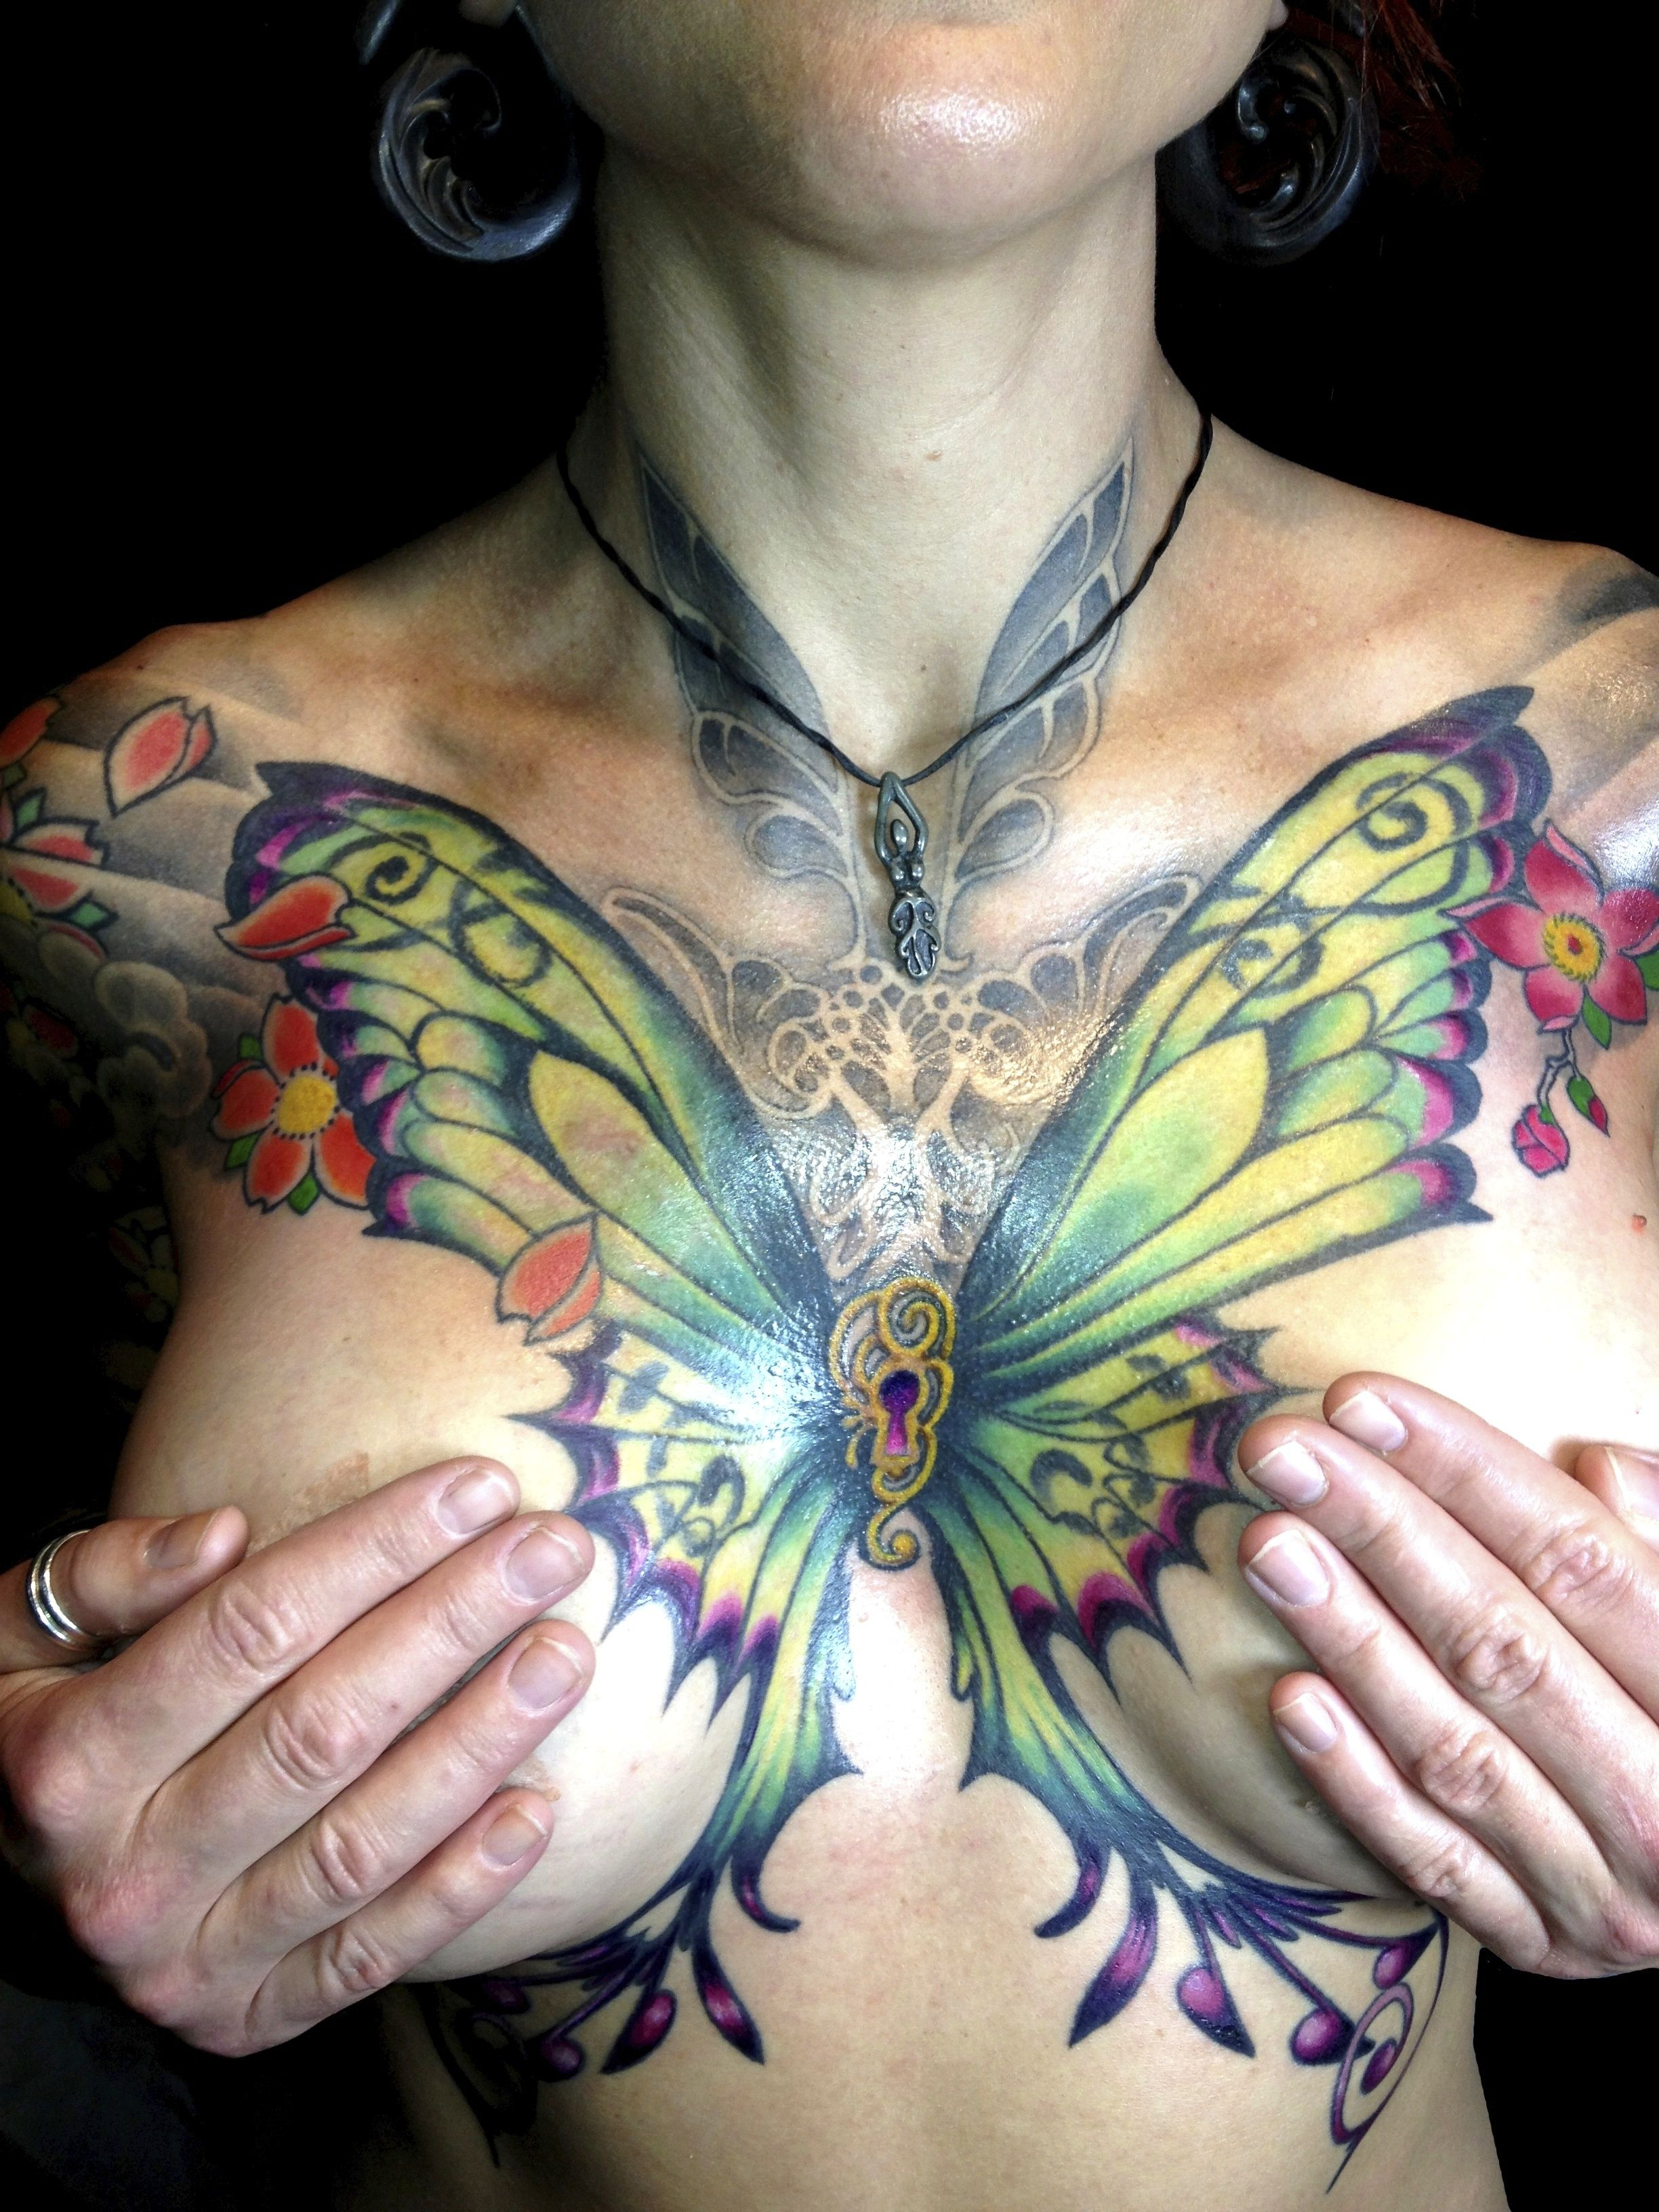 Tattoo Michael Norris Of Hubtattoo In Austin Texas Chest Tattoo intended for sizing 2448 X 3264